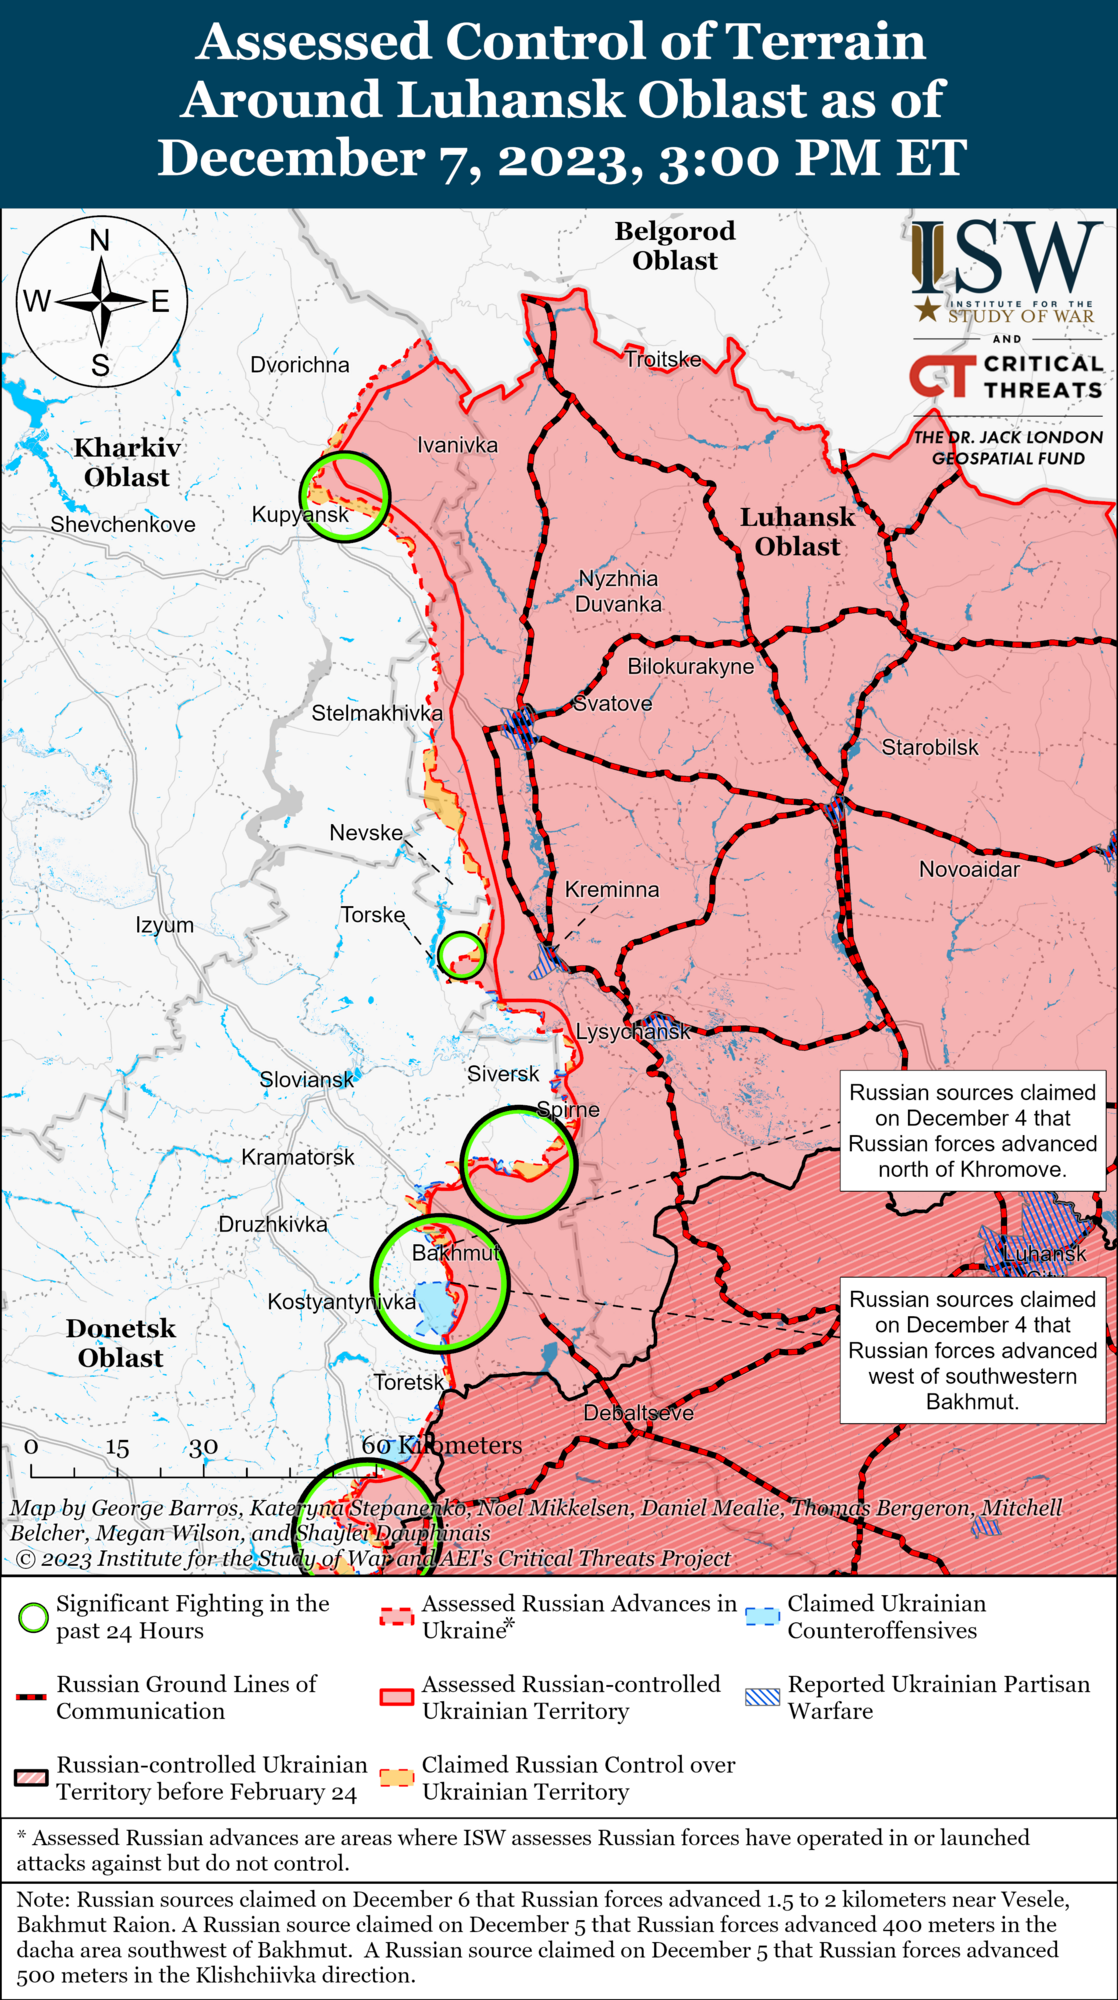 Occupants conduct massive assaults to capture Avdiivka: ISW points out the nuance of Russian losses and replenishment of forces